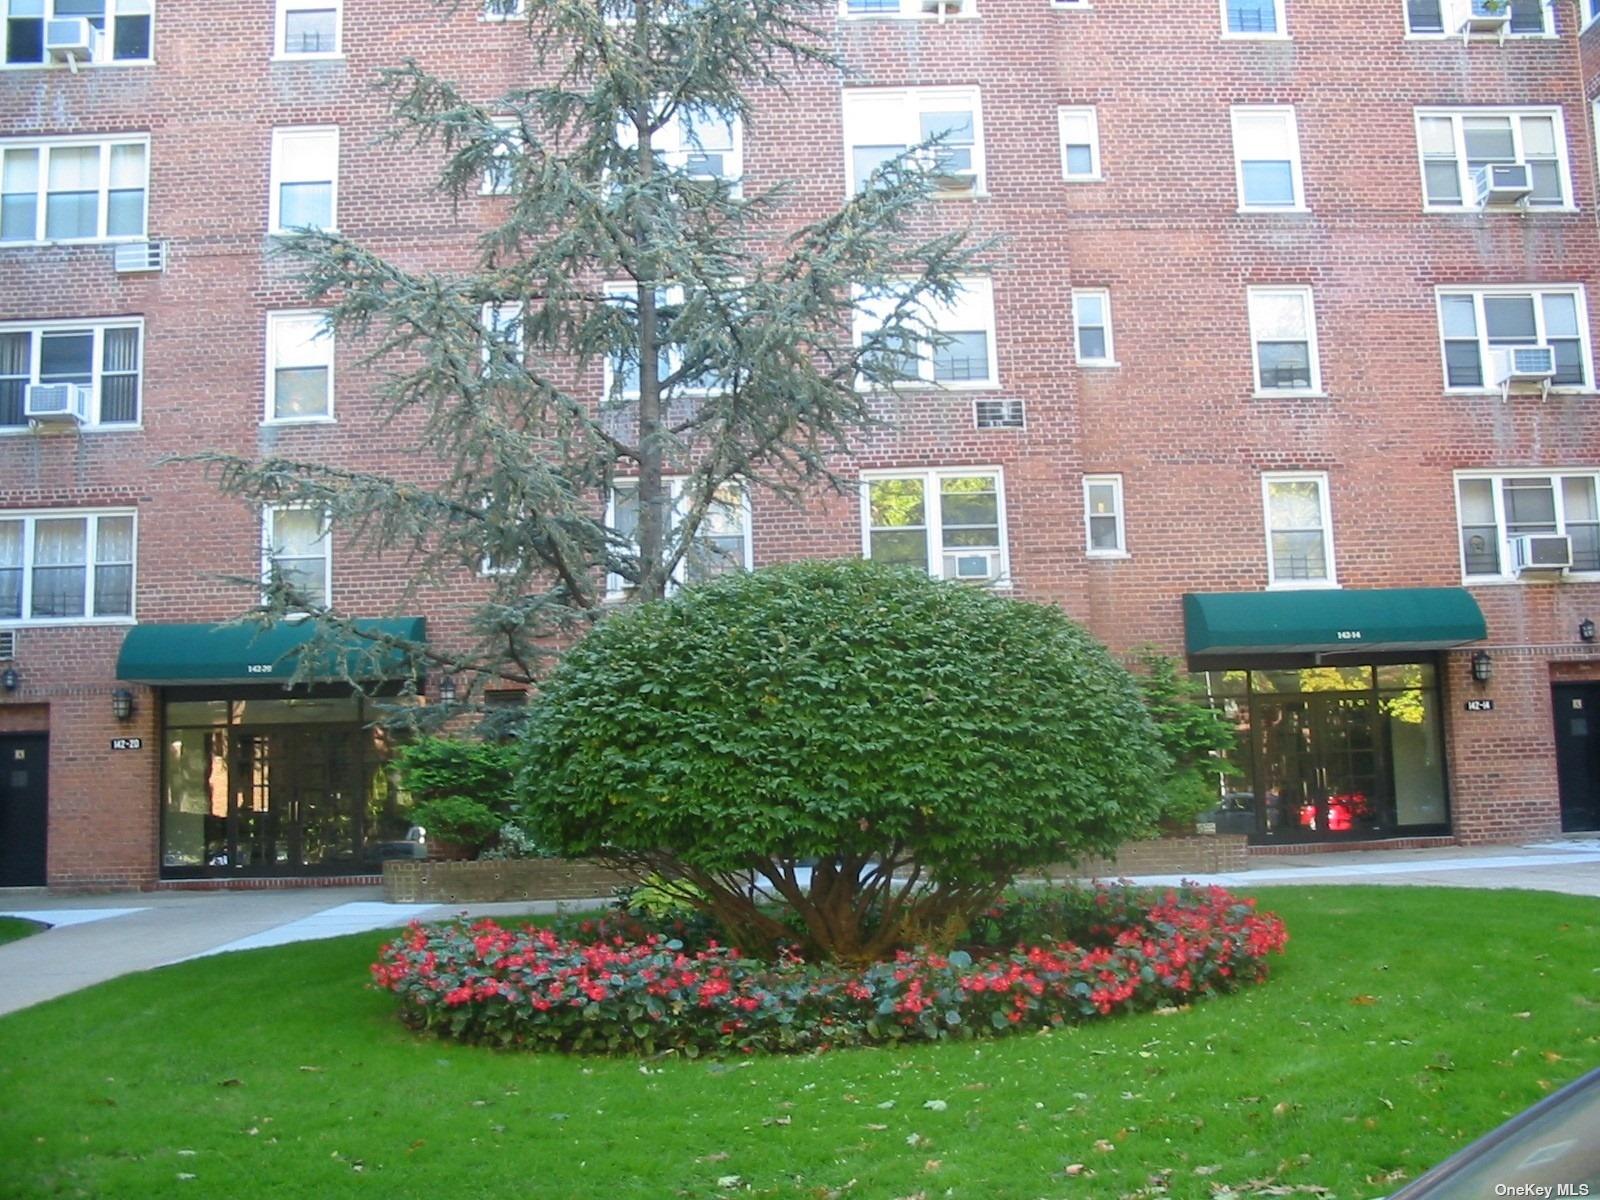 a front view of a building with garden